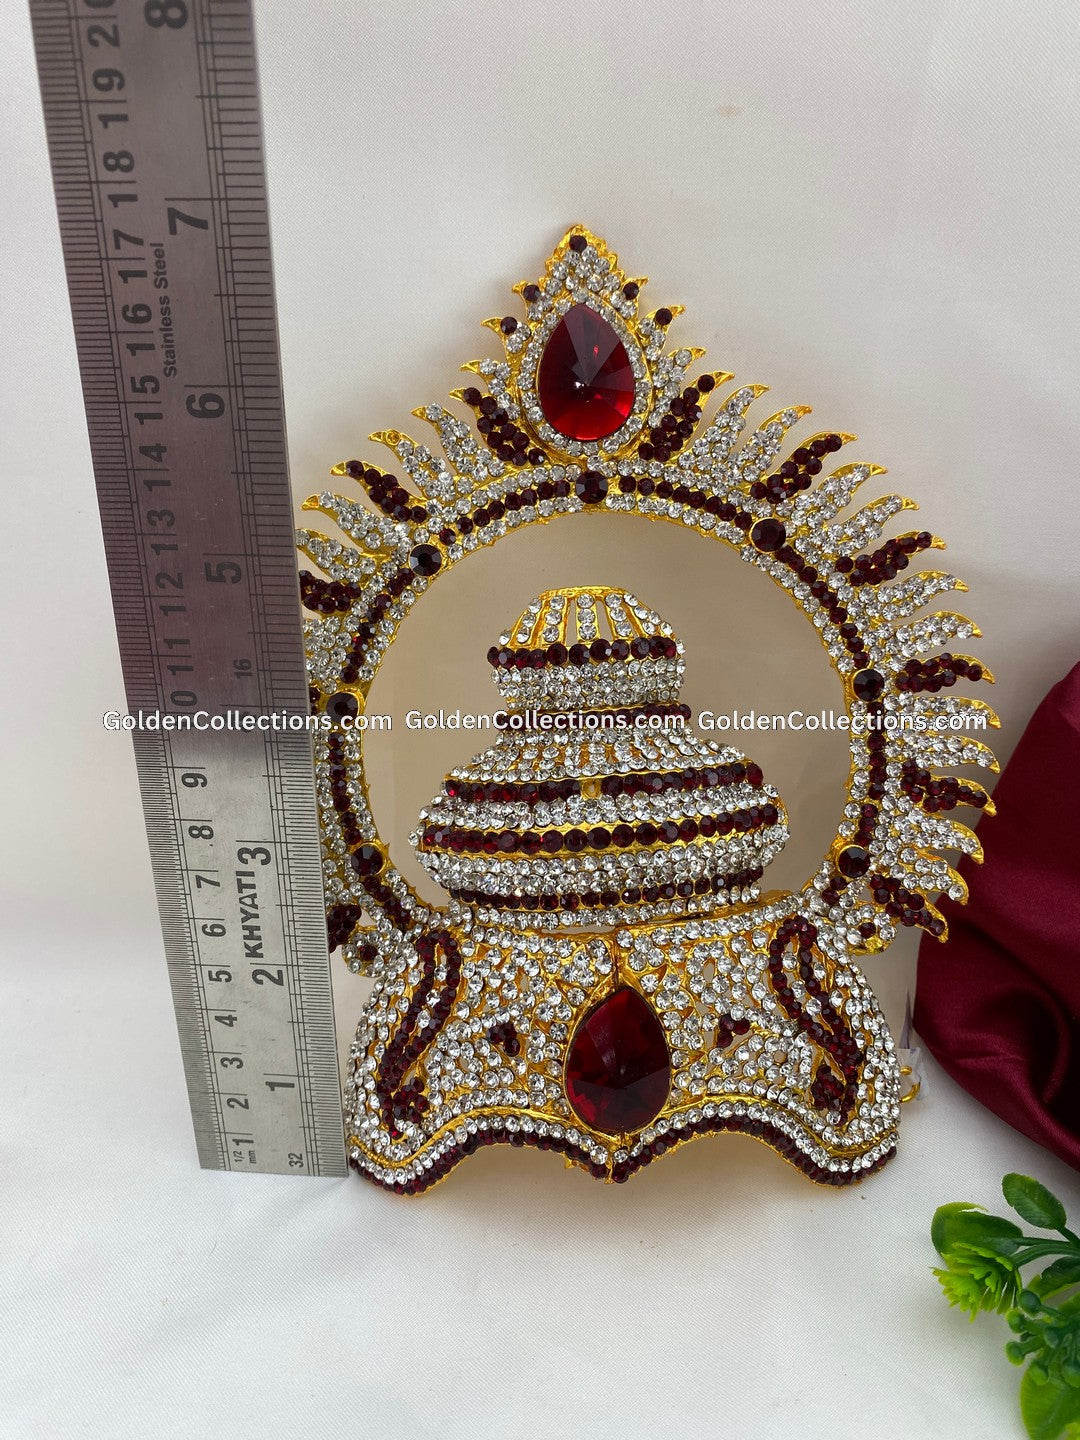 Ornate Crown for Goddess Idol - GoldenCollections DGC-118 2